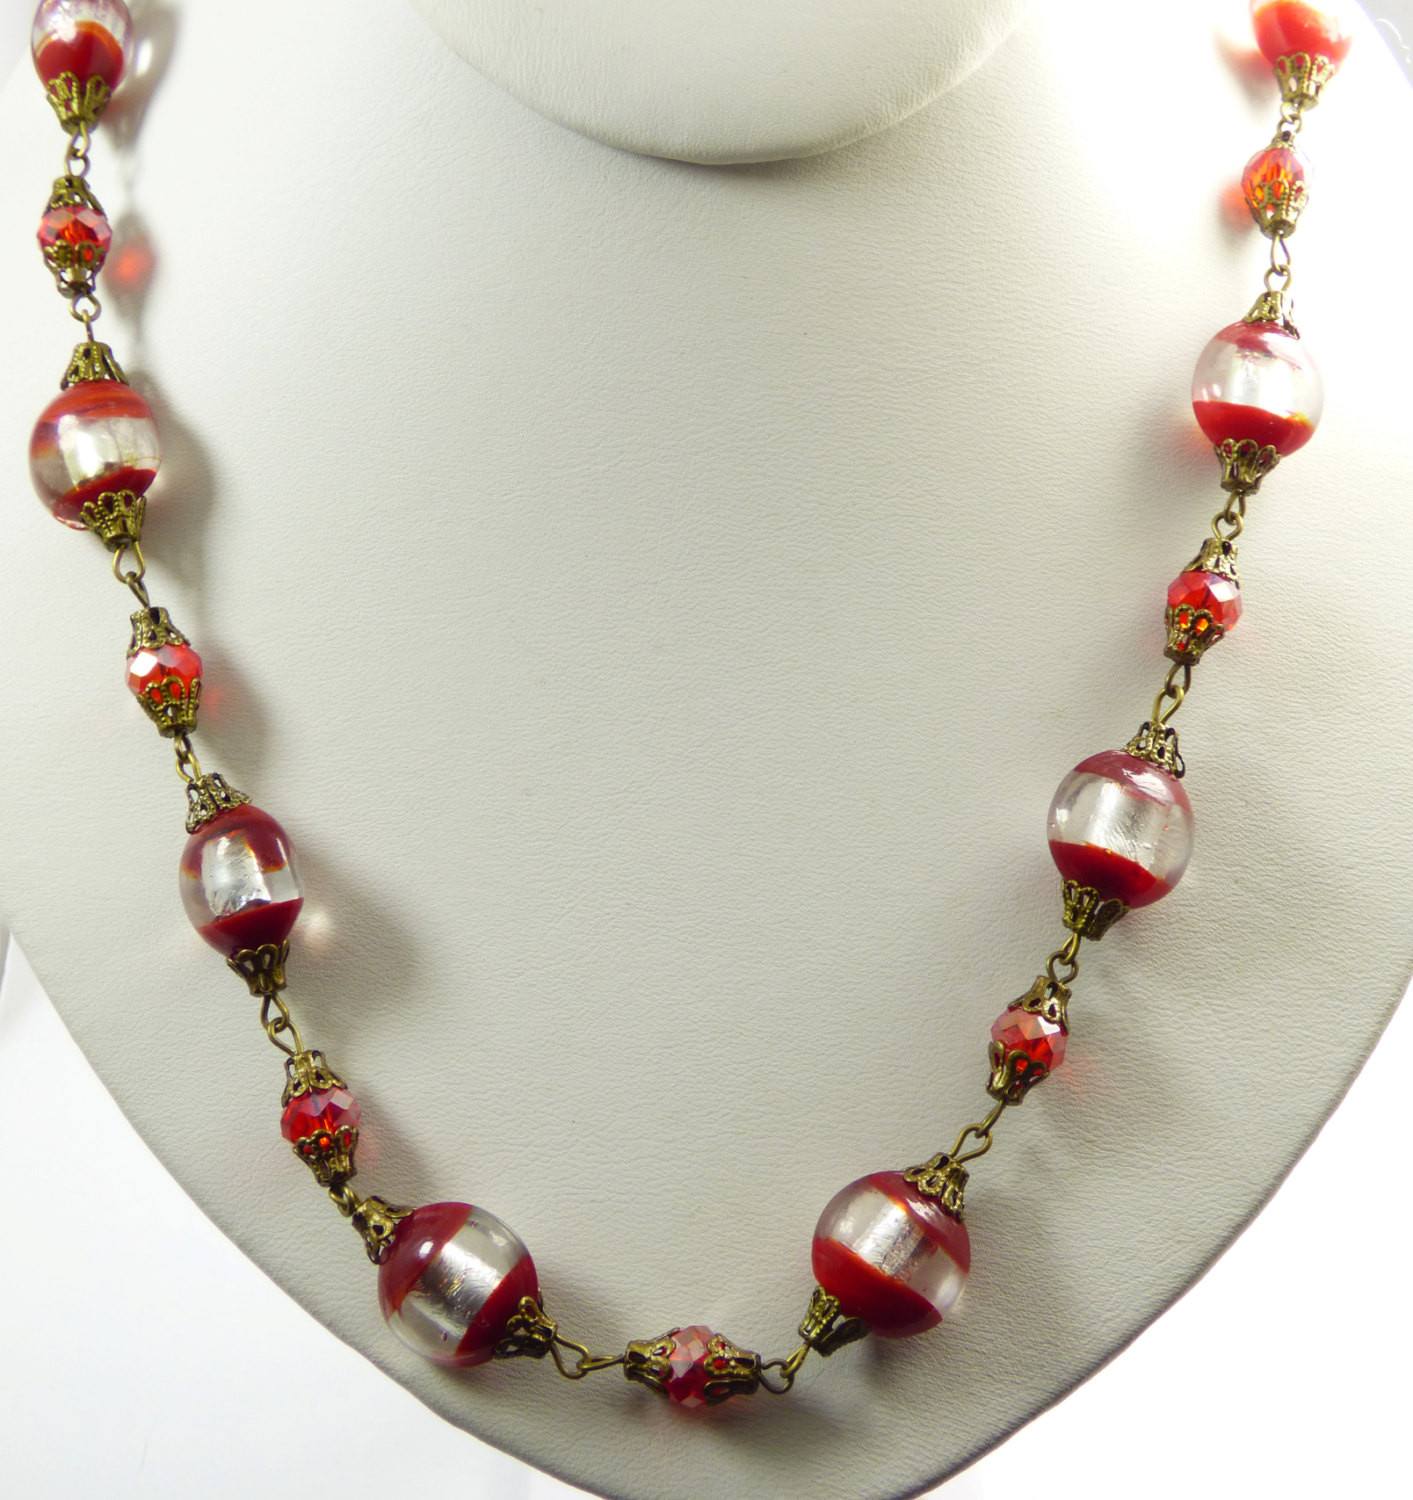 Vintage Red and Silver Foil Lampwork Glass Crystal Bead Necklace ...